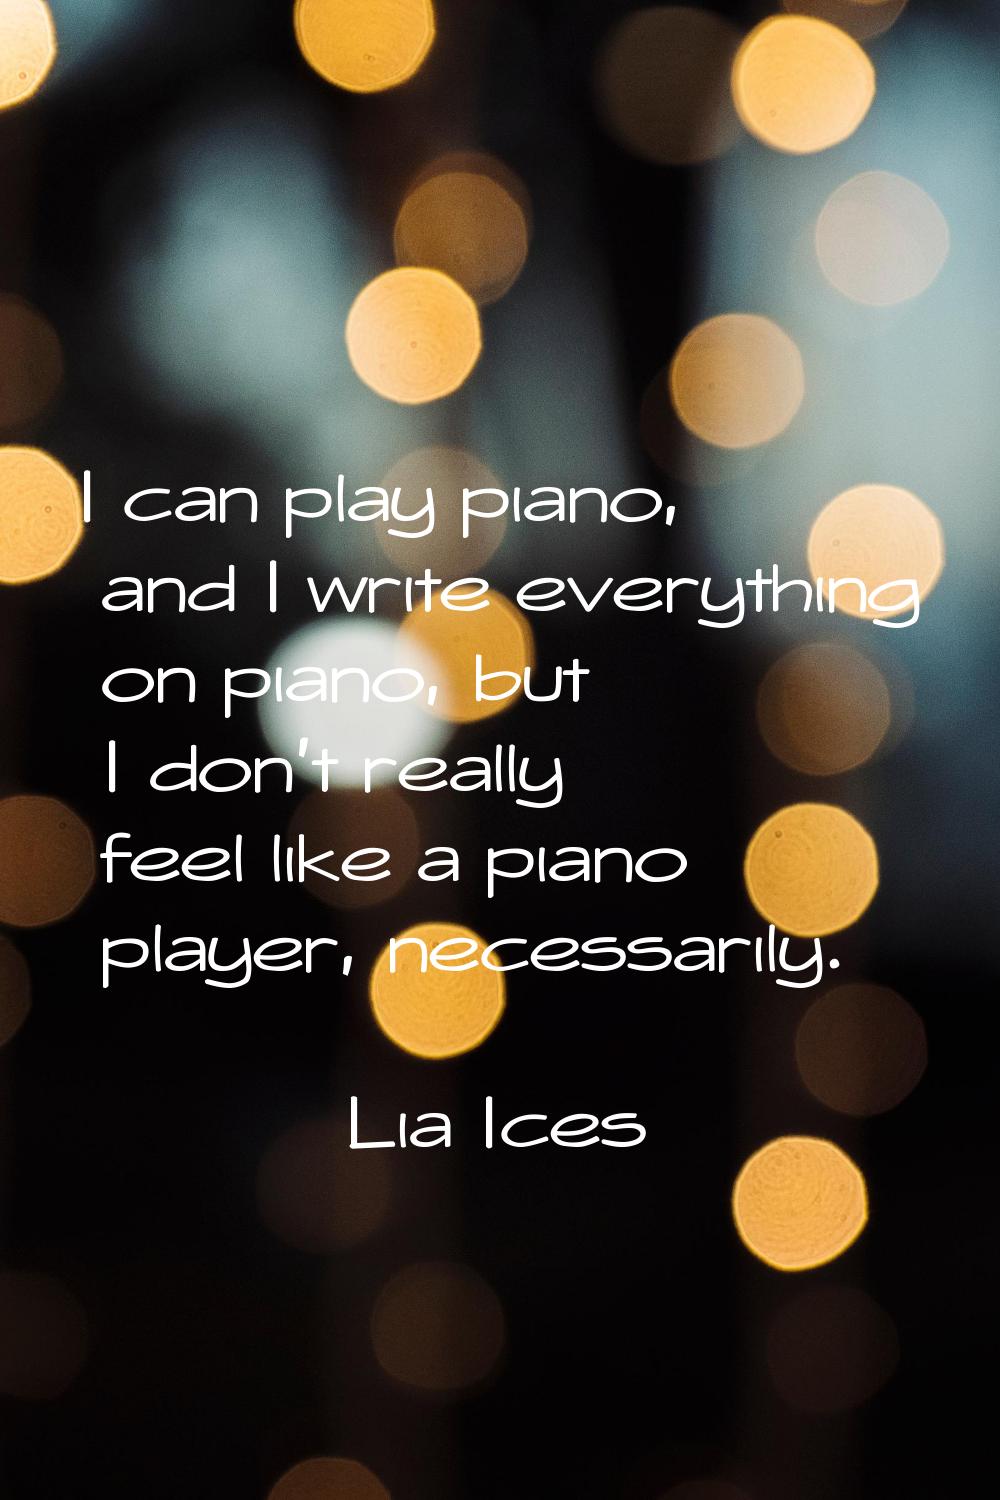 I can play piano, and I write everything on piano, but I don't really feel like a piano player, nec